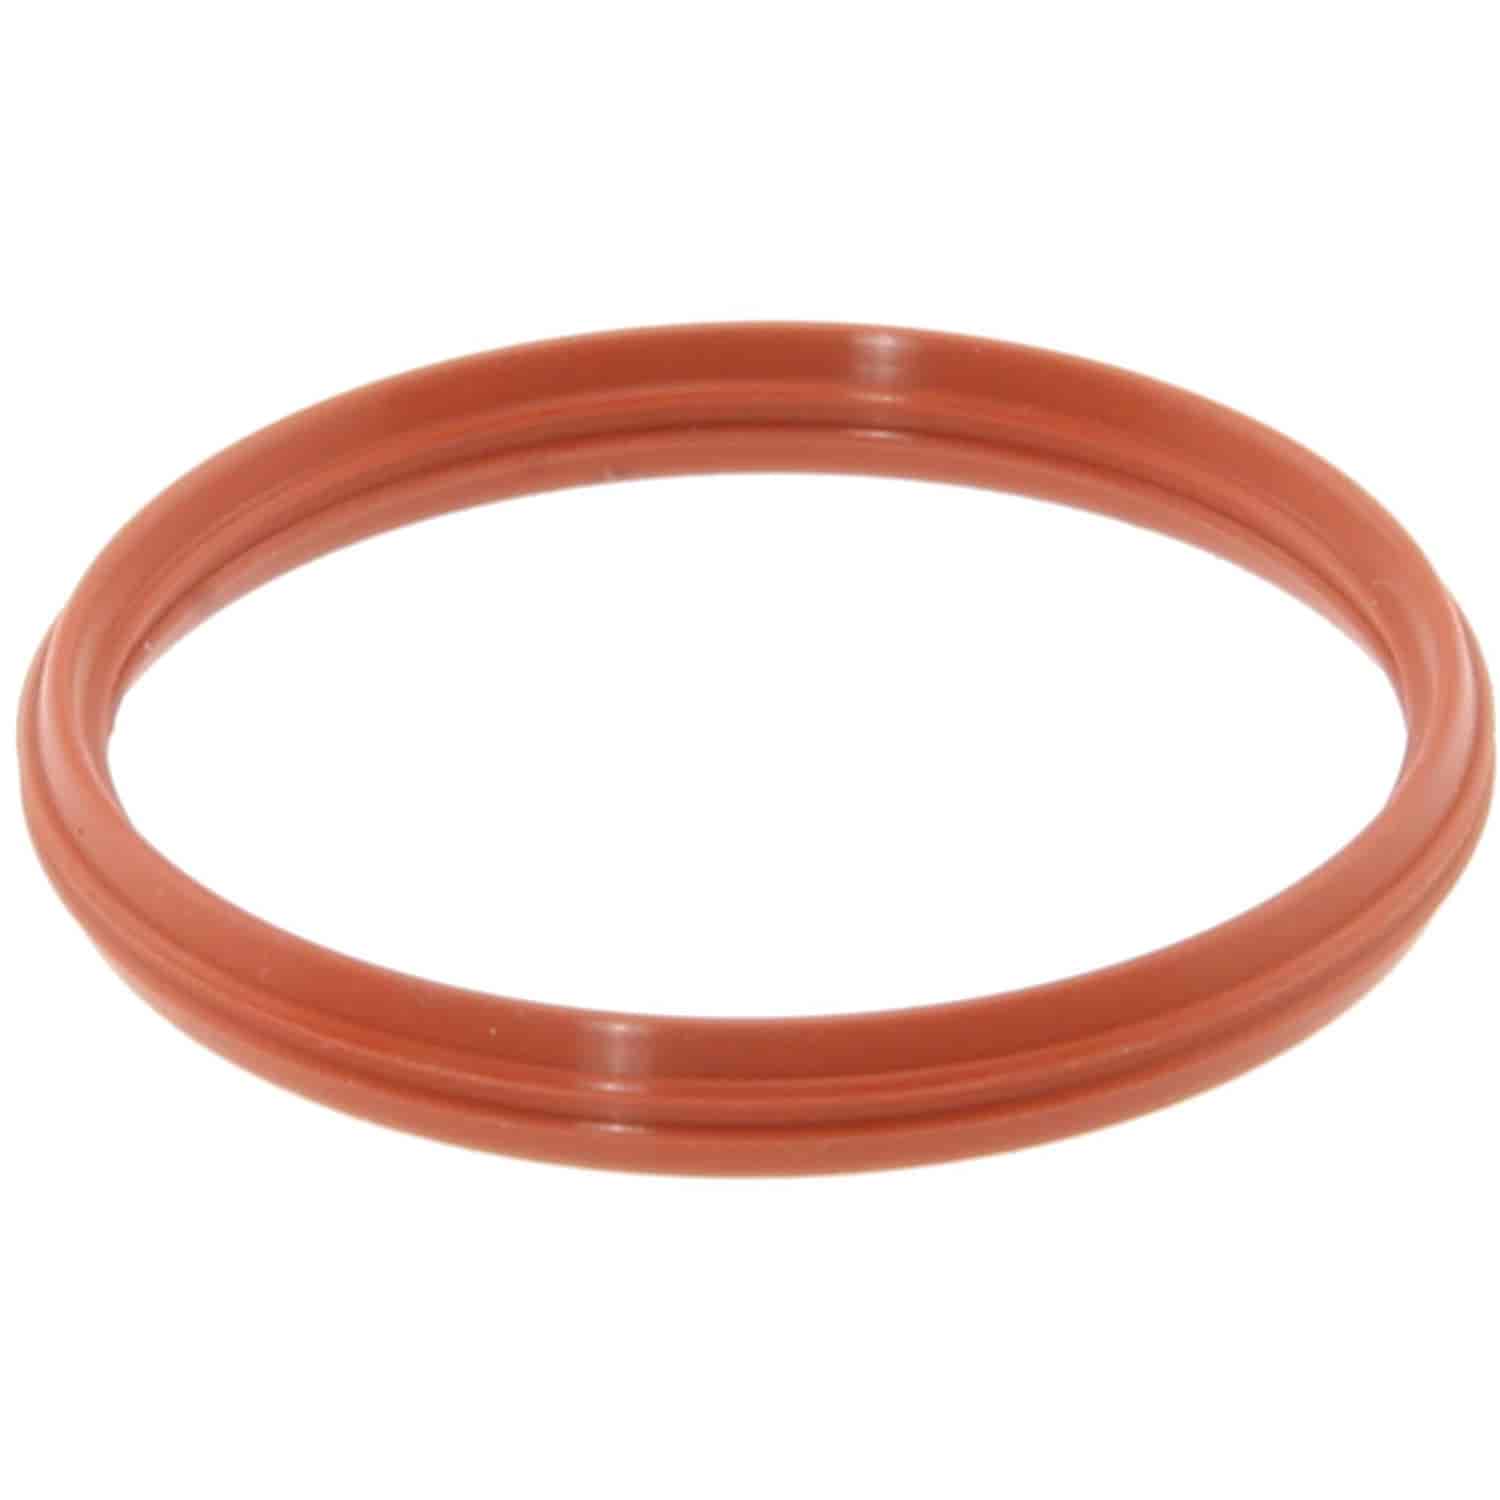 Water Outlet Gasket Ford Truck 4 Cyl. 2.5L SOHC 1998-2001. Mazda Truck 4 Cyl. 2.5L SOHC 98-01.